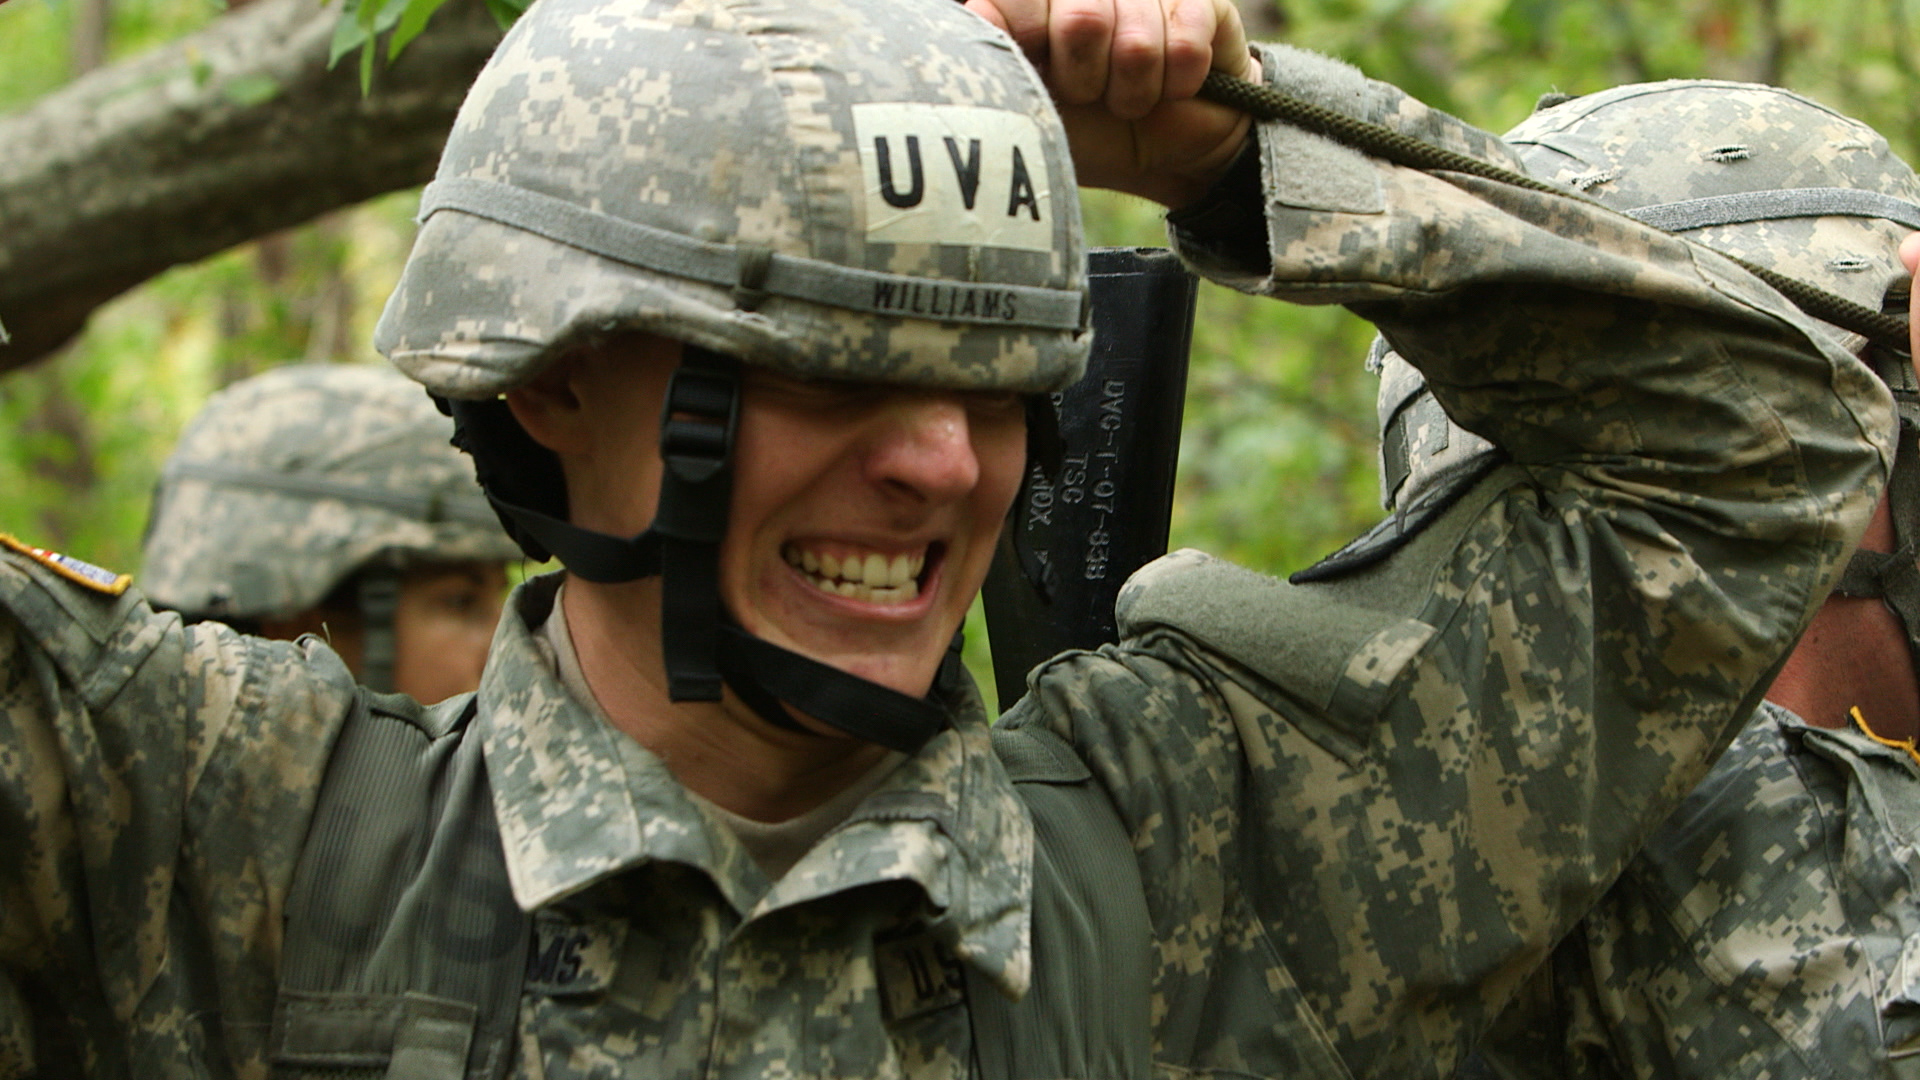 Williams in Military uniform with tape on his helmet that reads UVA during a bootcamp ROTC course